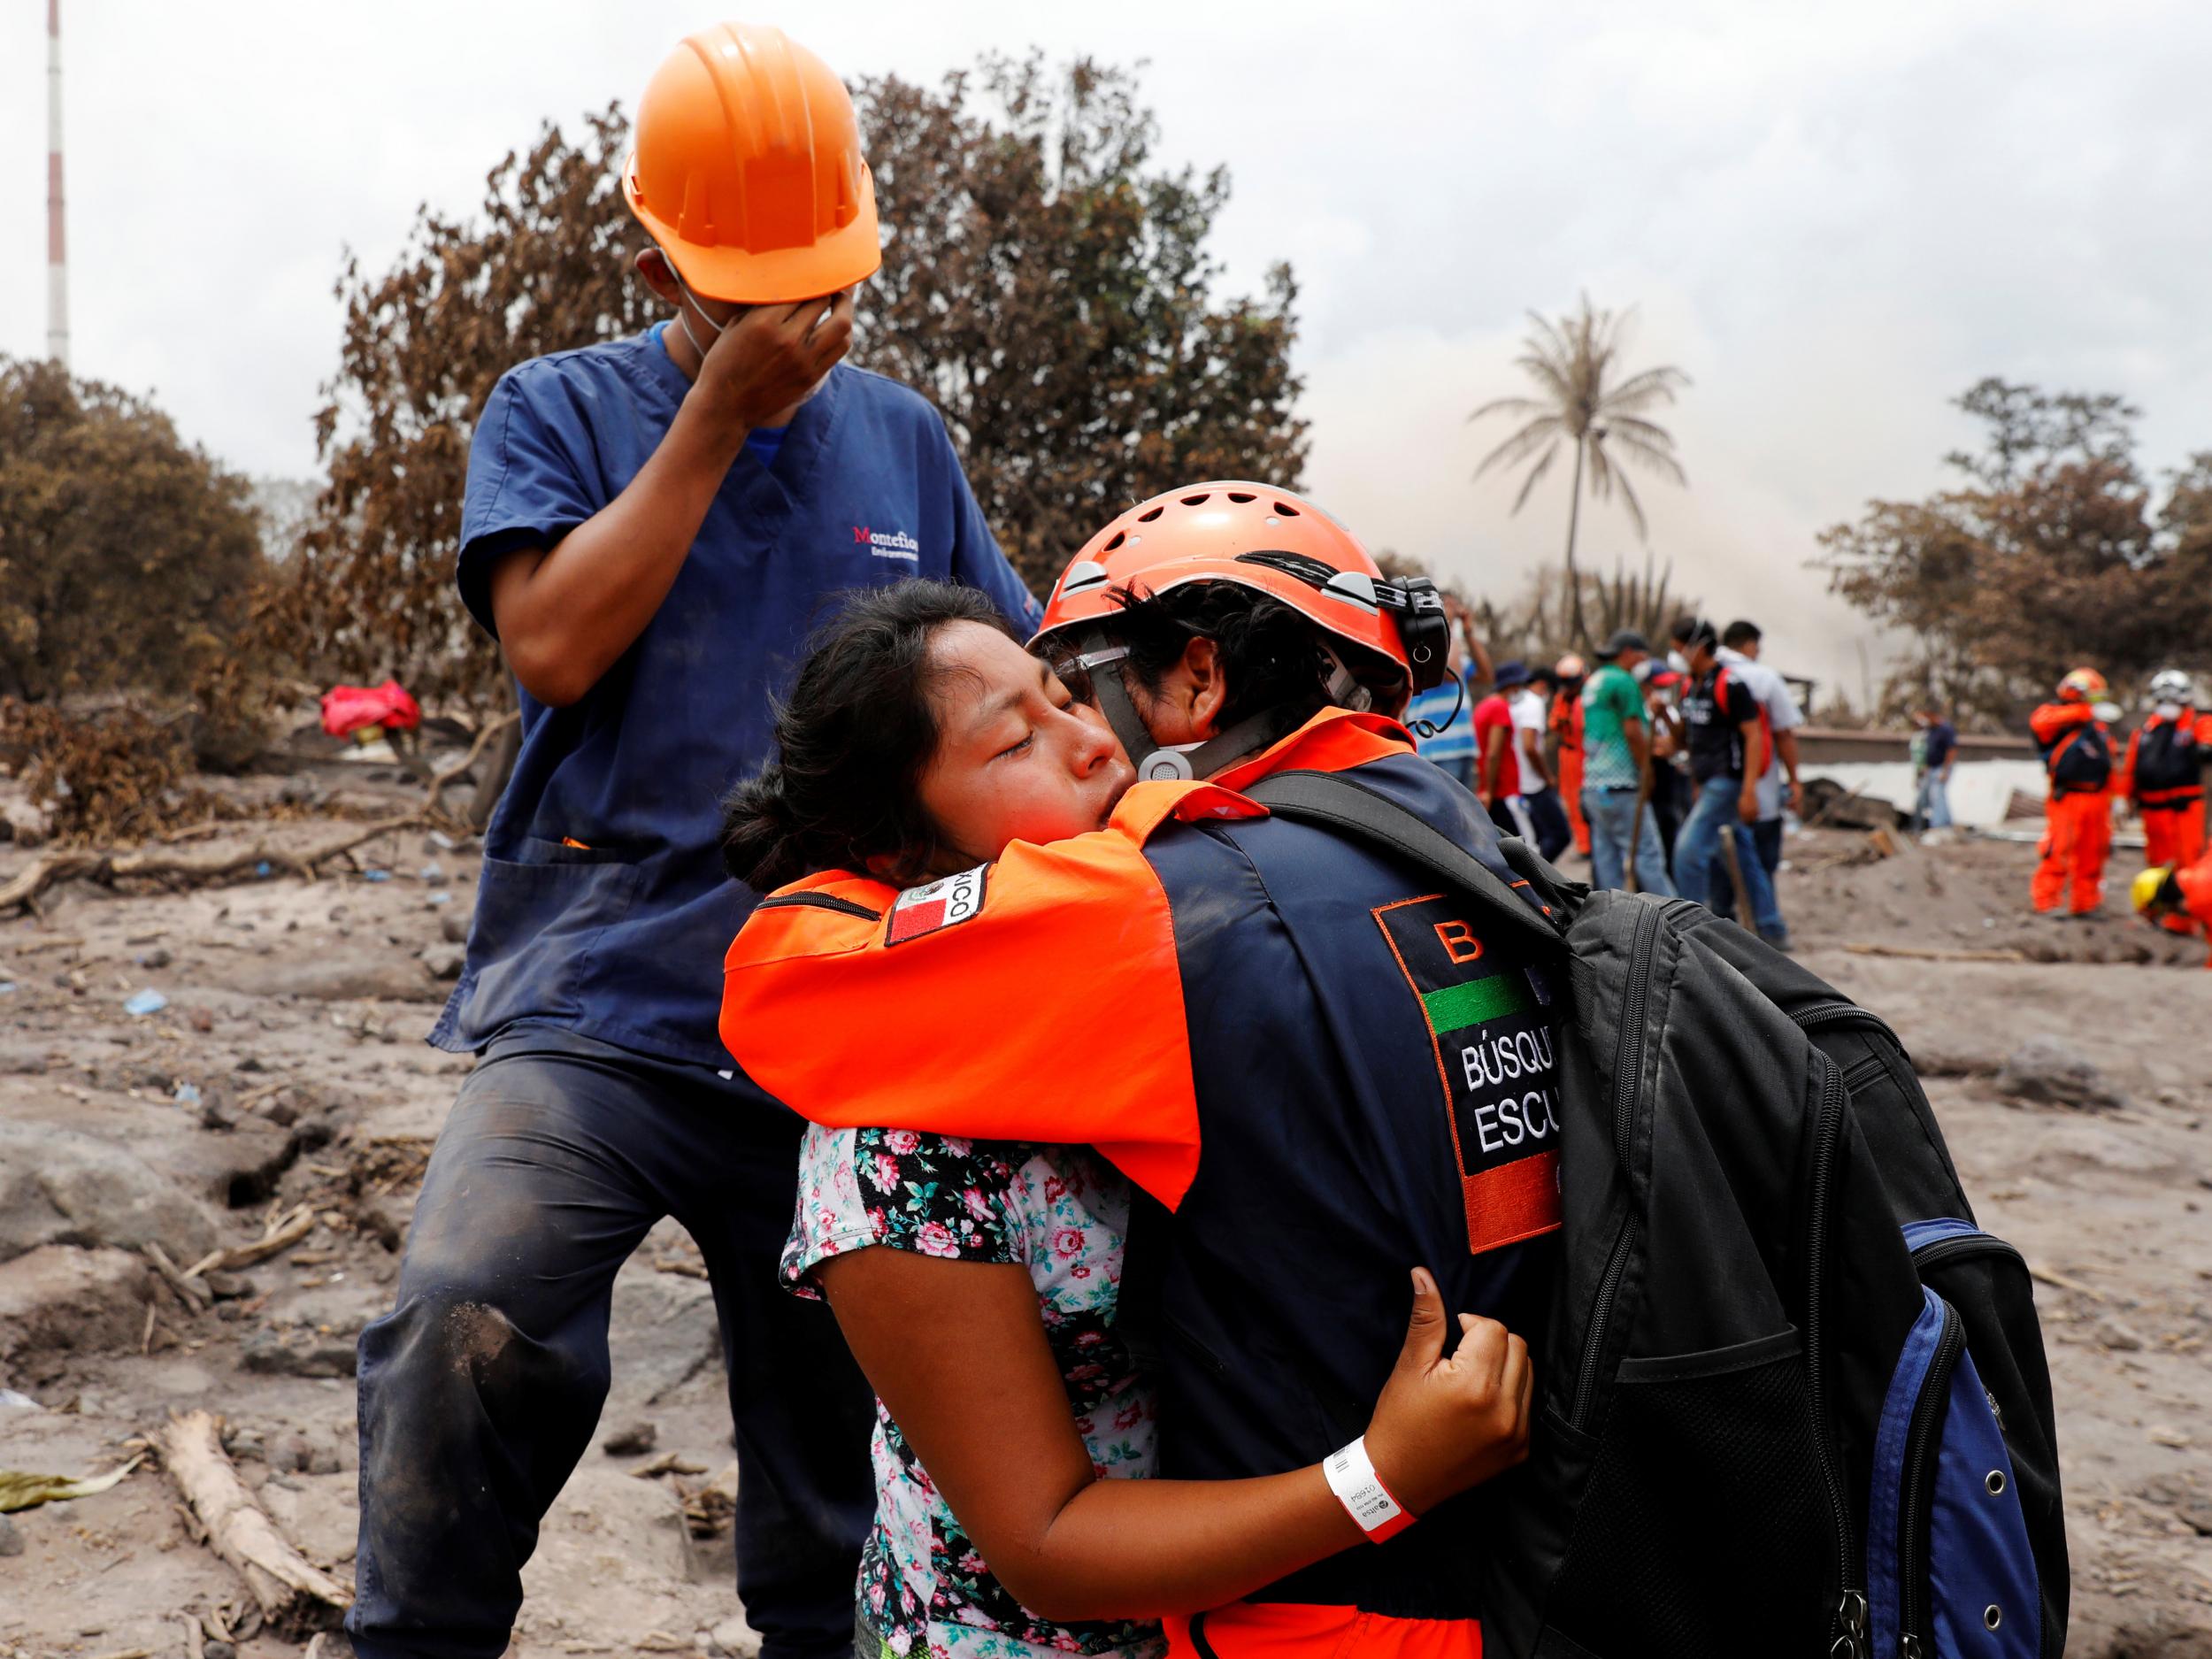 A survivor who is looking for her daughter is comforted by a volunteer after the eruption of the Fuego volcano in Guatemala on June 9 2018.